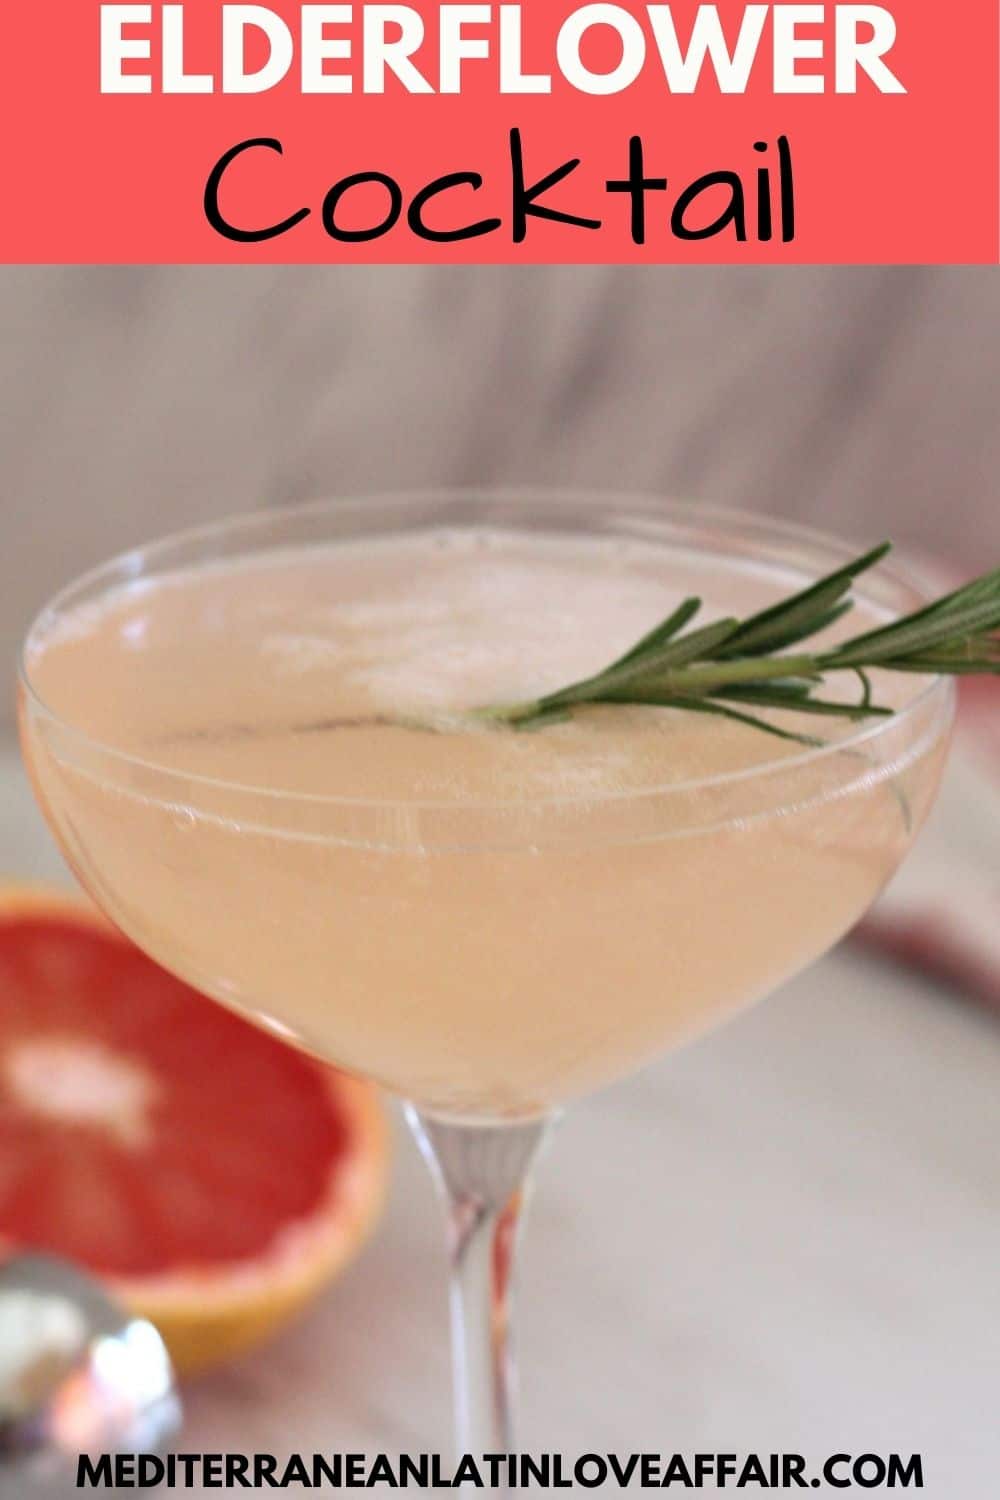 An image prepared for Pinterest with a picture of the elderflower cocktail shown in the middle. On top there's a title bar and on the bottom a website link.